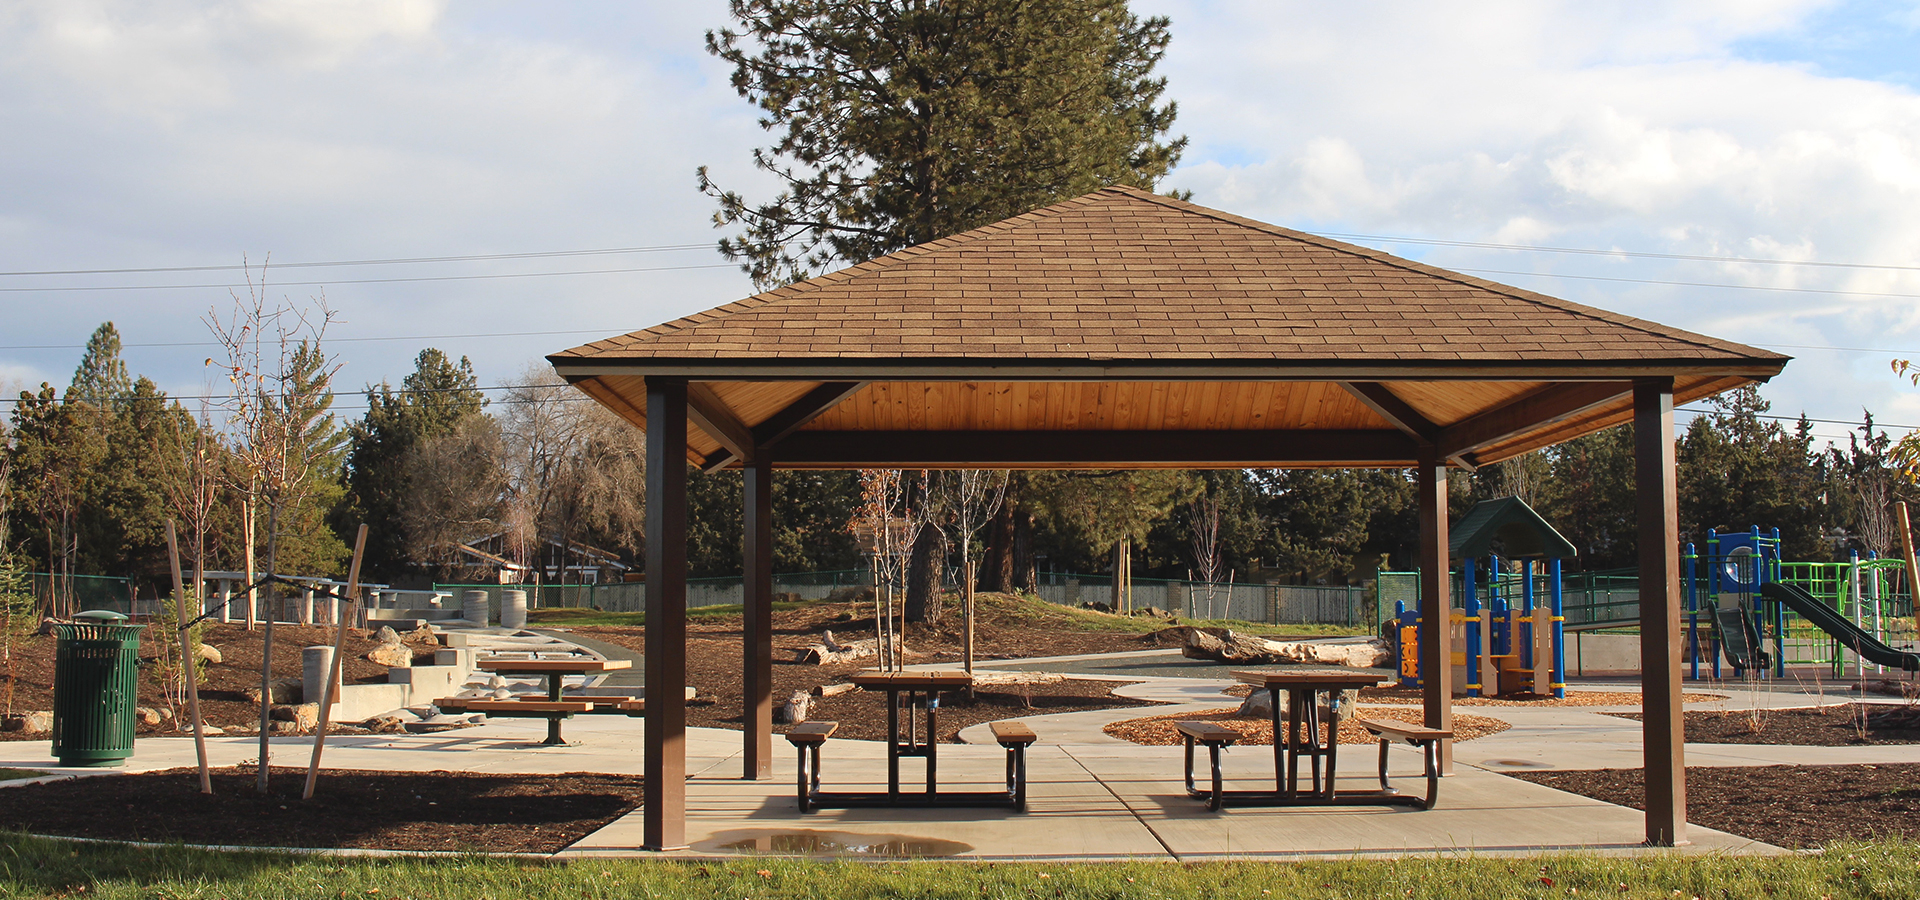 The picnic shelter at Canal Row Park.